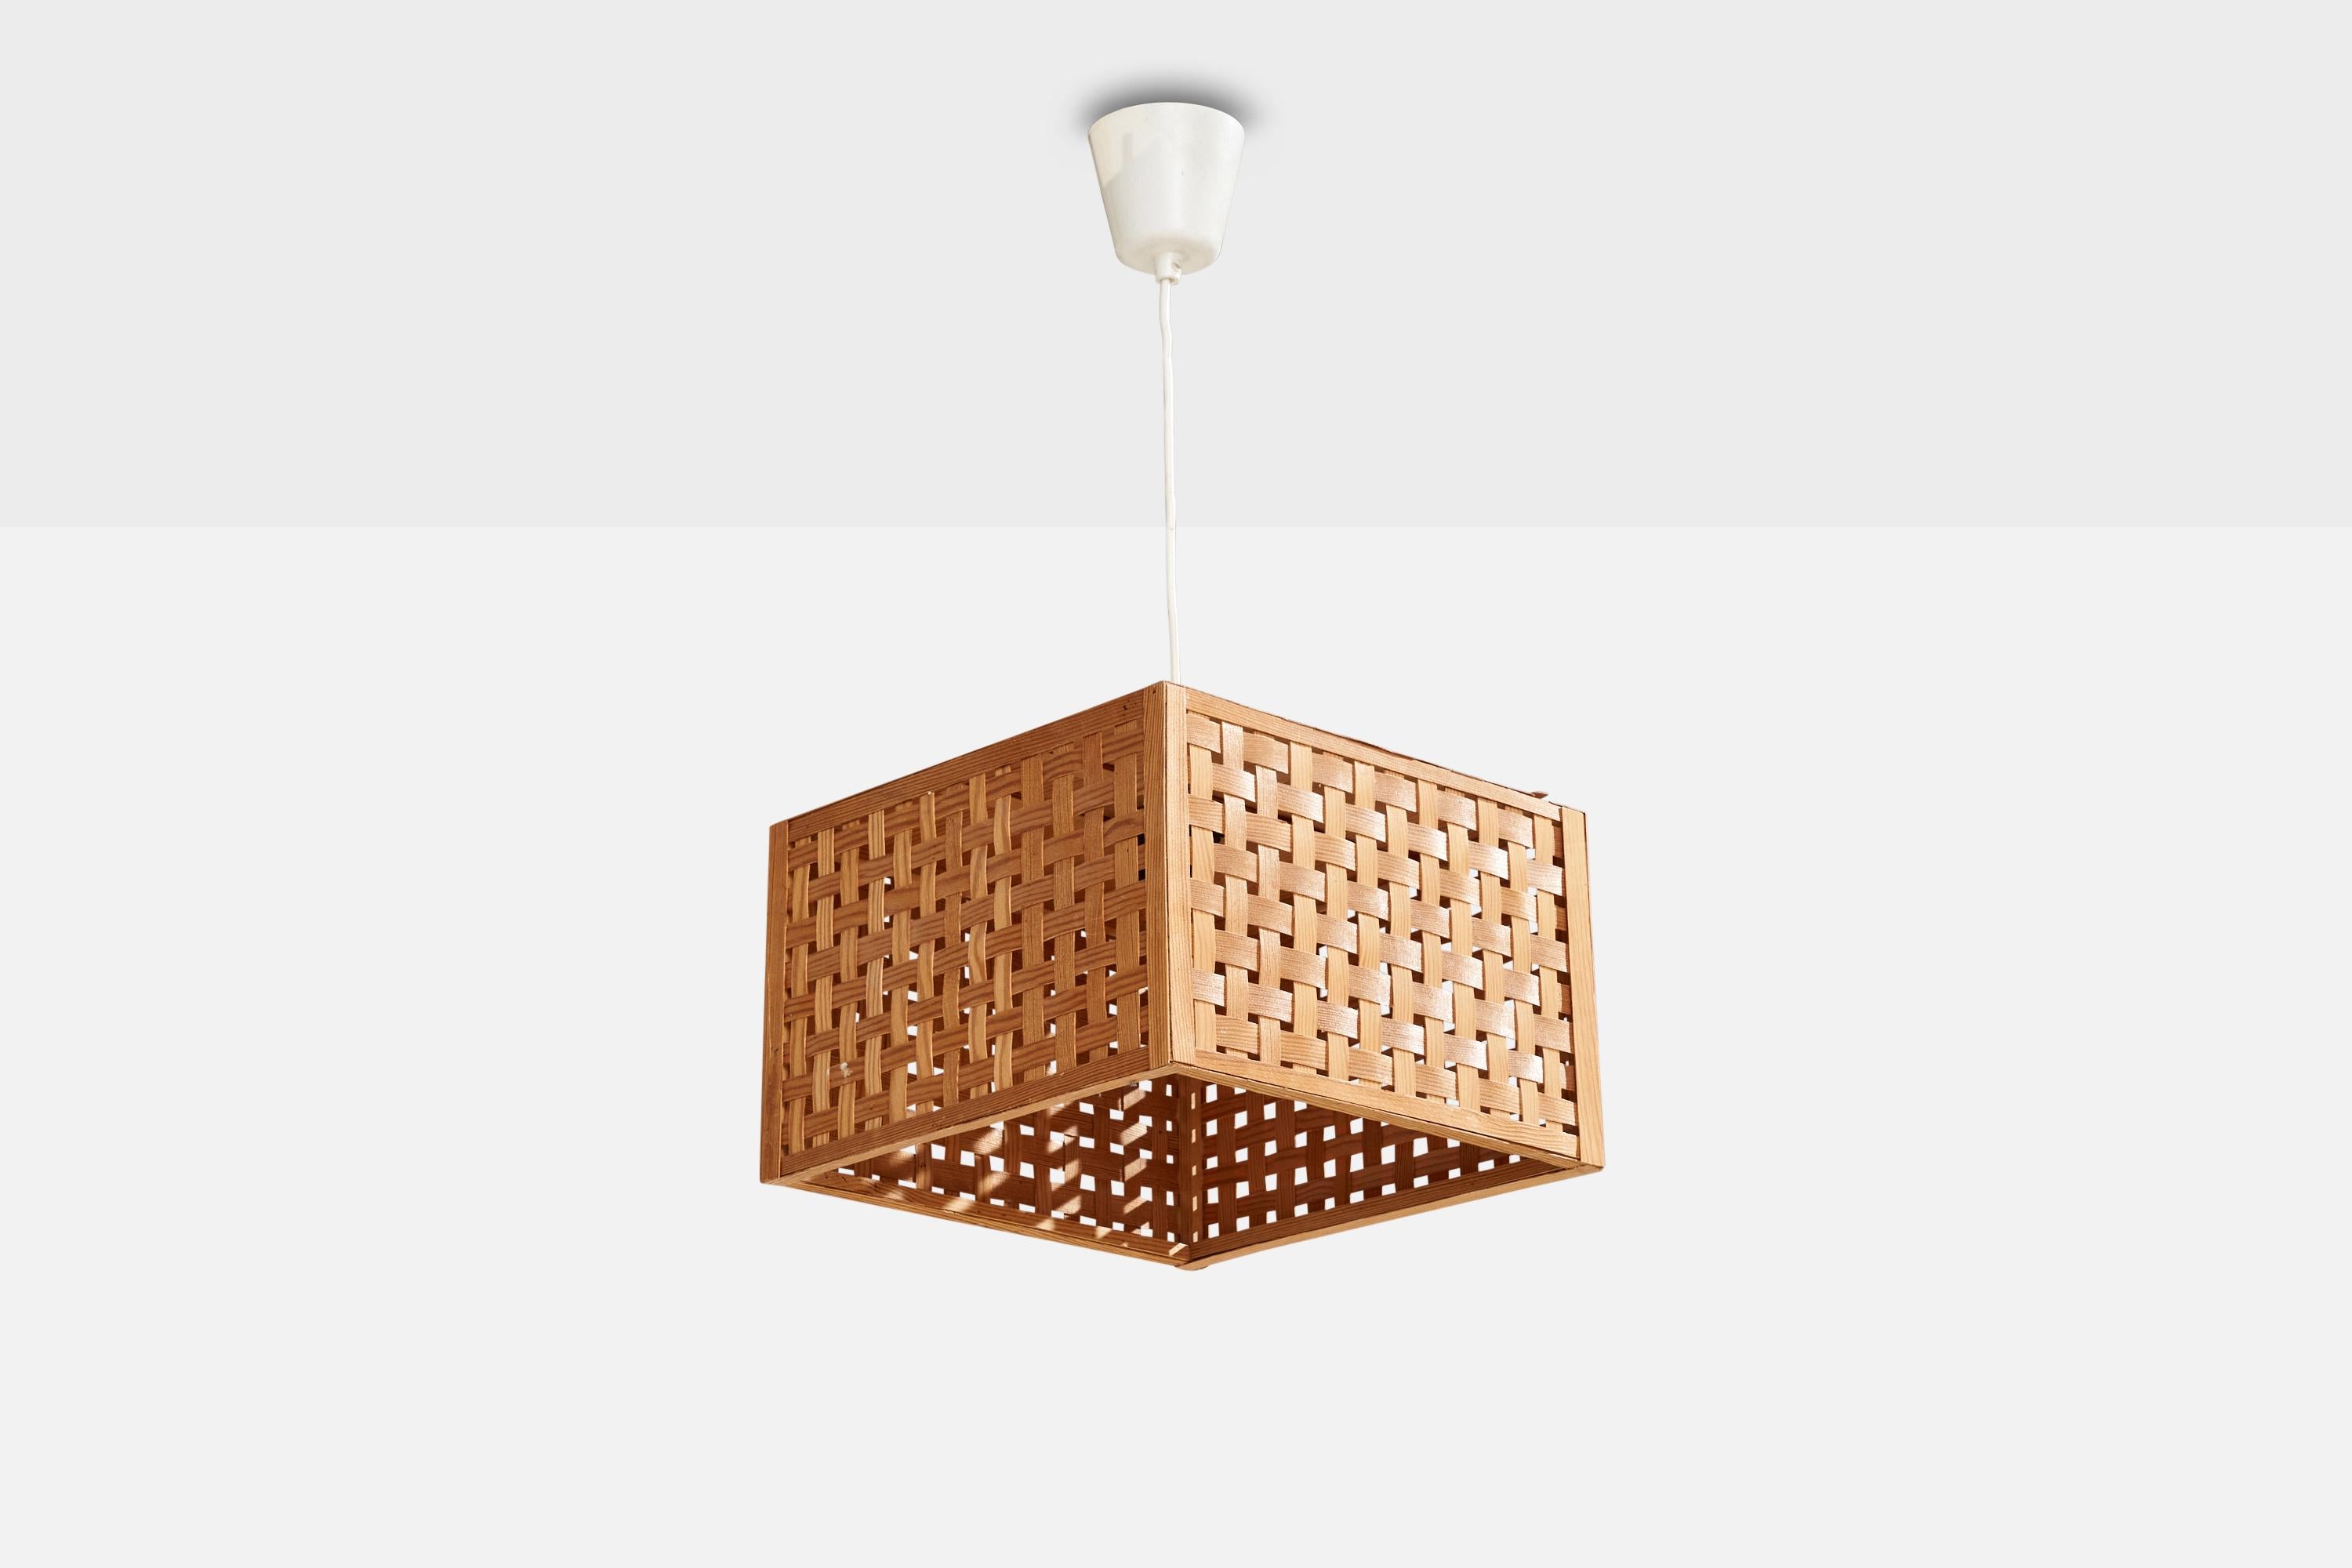 A pine and pine veneer pendant light designed and produced in Sweden, c. 1970s.

Dimensions of canopy (inches): 3.34” H x 3.6” Diameter
Socket takes standard E-26 bulbs. 1 socket.There is no maximum wattage stated on the fixture. All lighting will